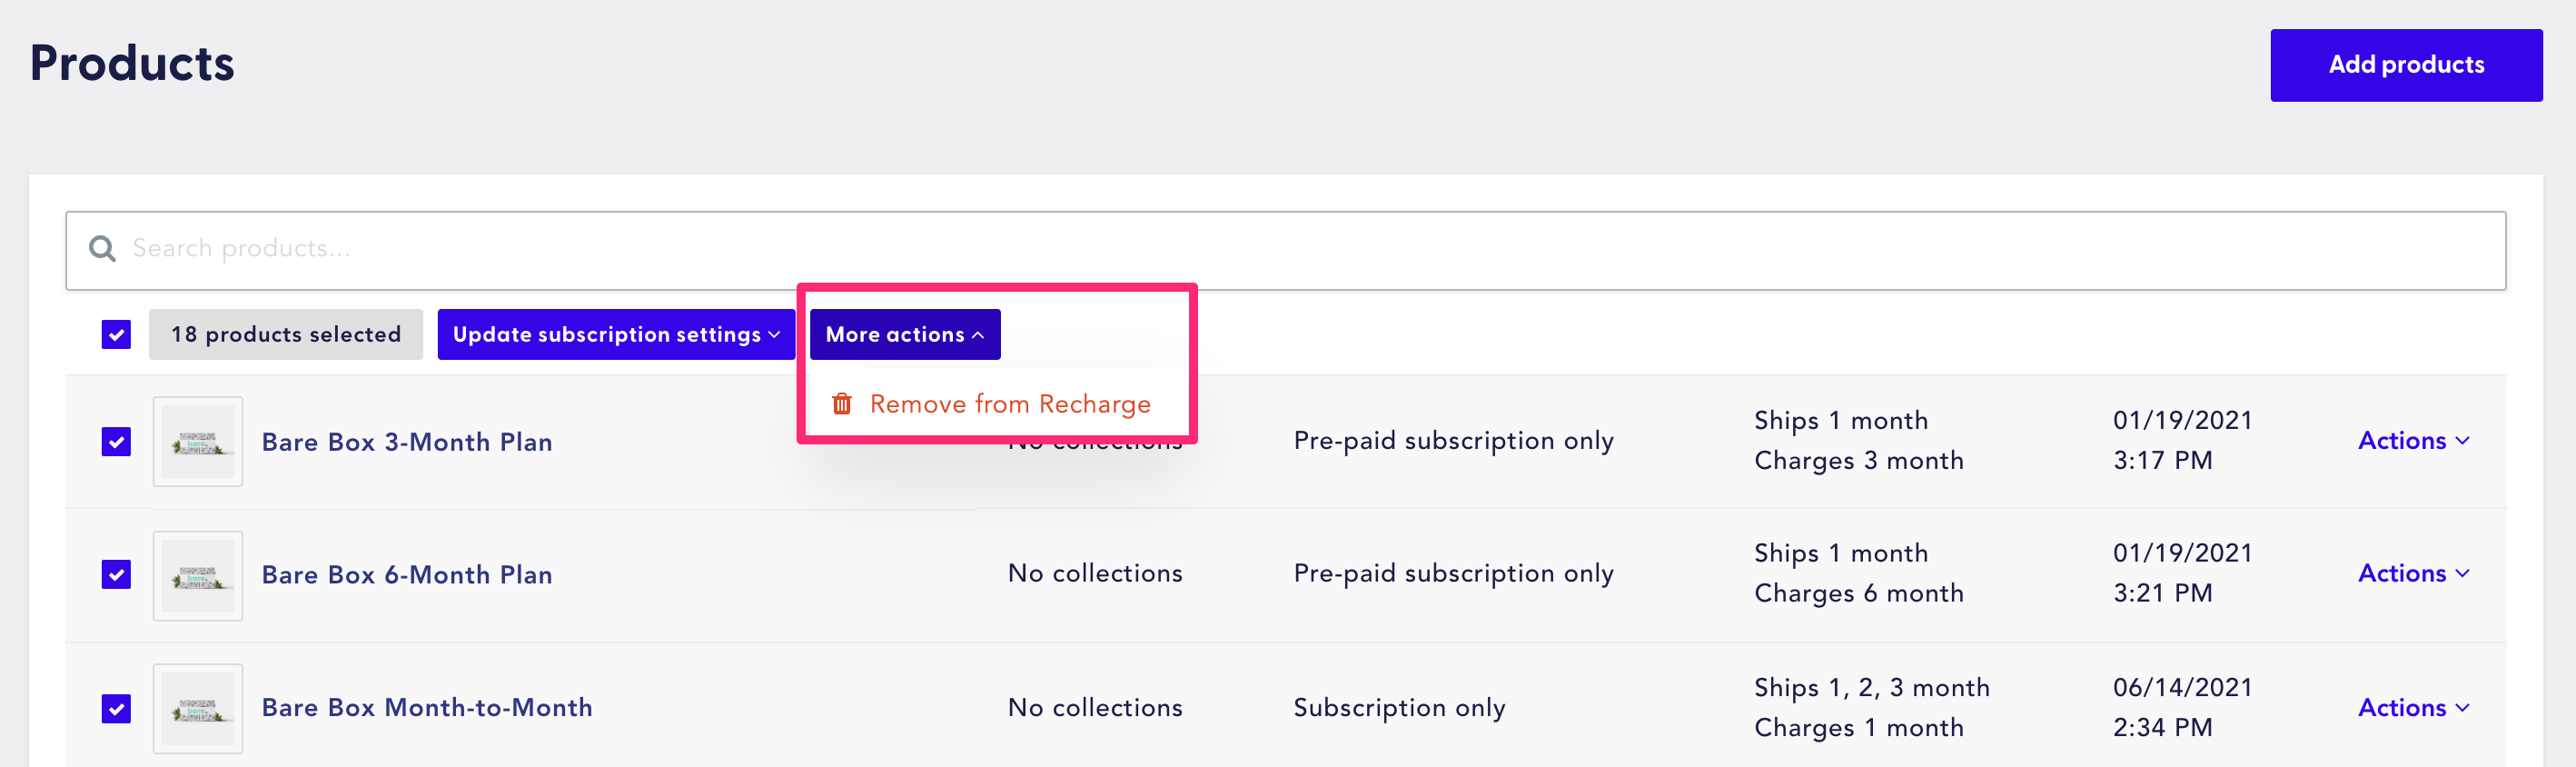 remove from recharge in bulk from the product page